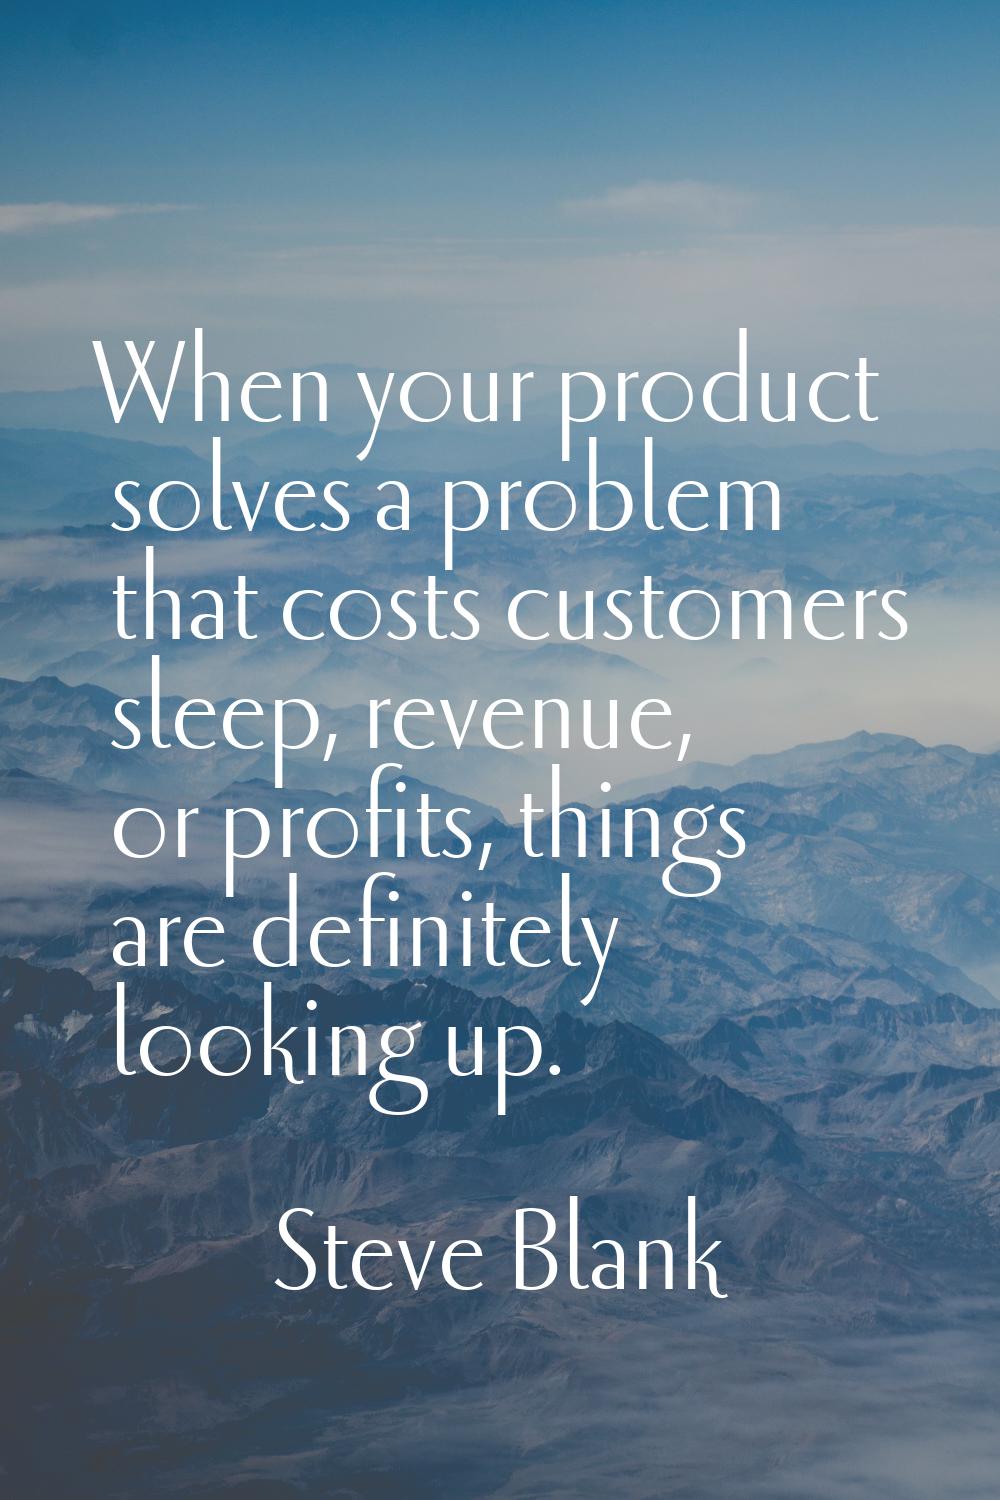 When your product solves a problem that costs customers sleep, revenue, or profits, things are defi